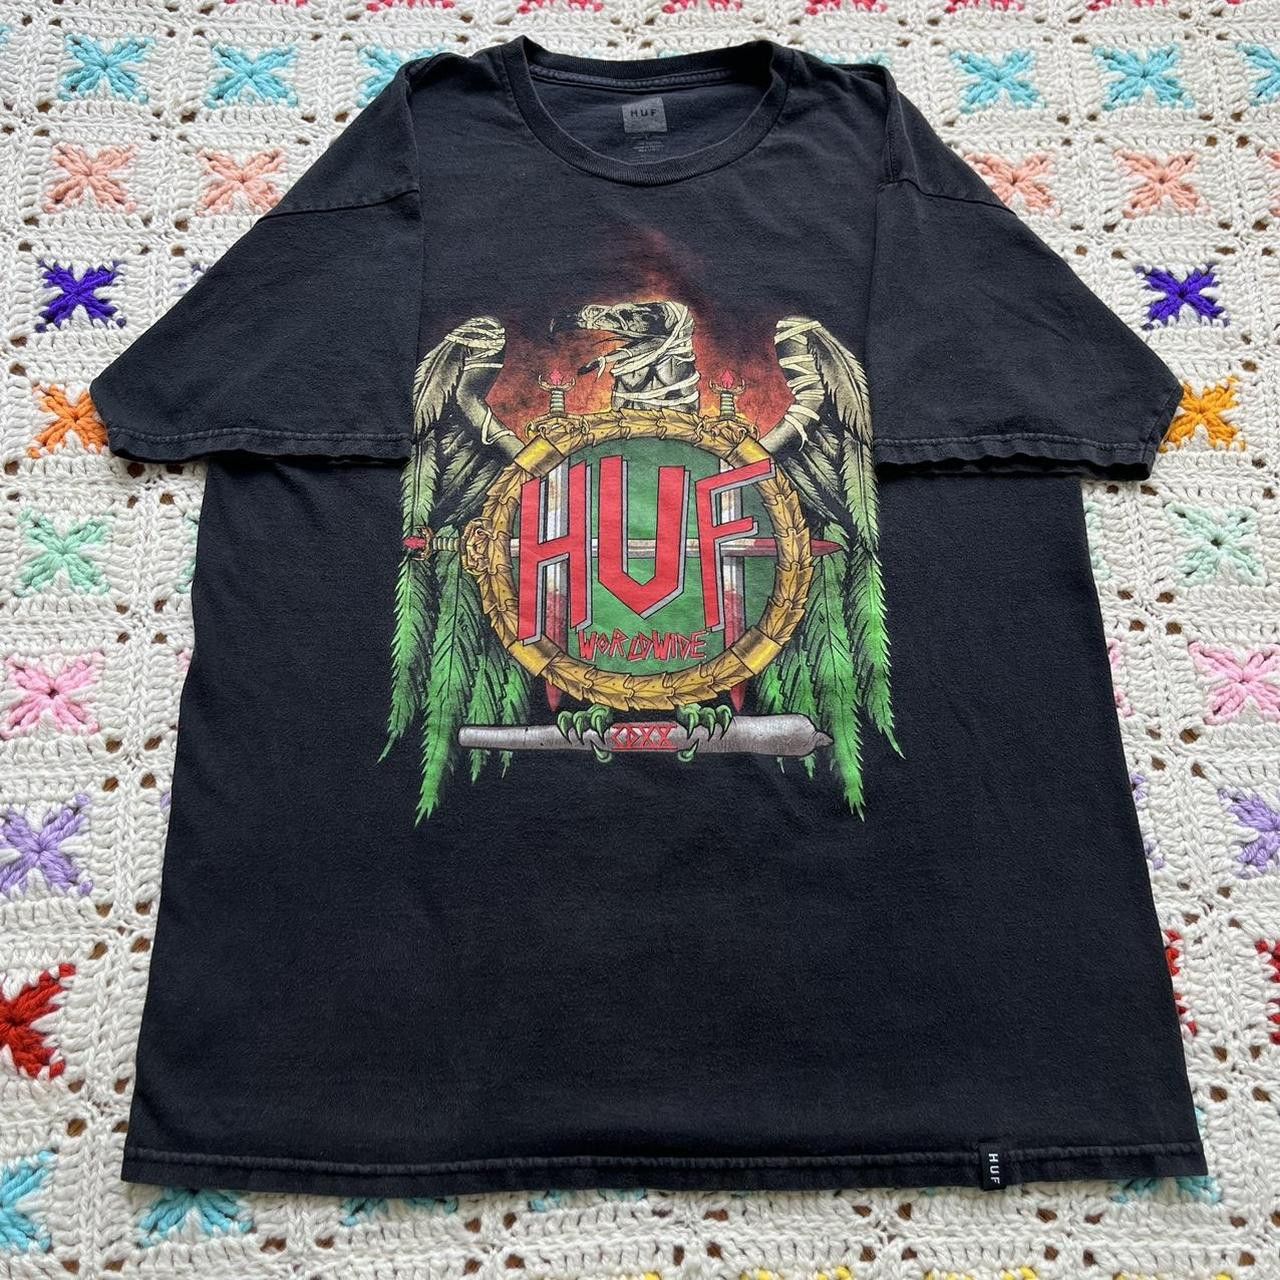 Huf Huf Weed Legalization Tour T shirt | Grailed